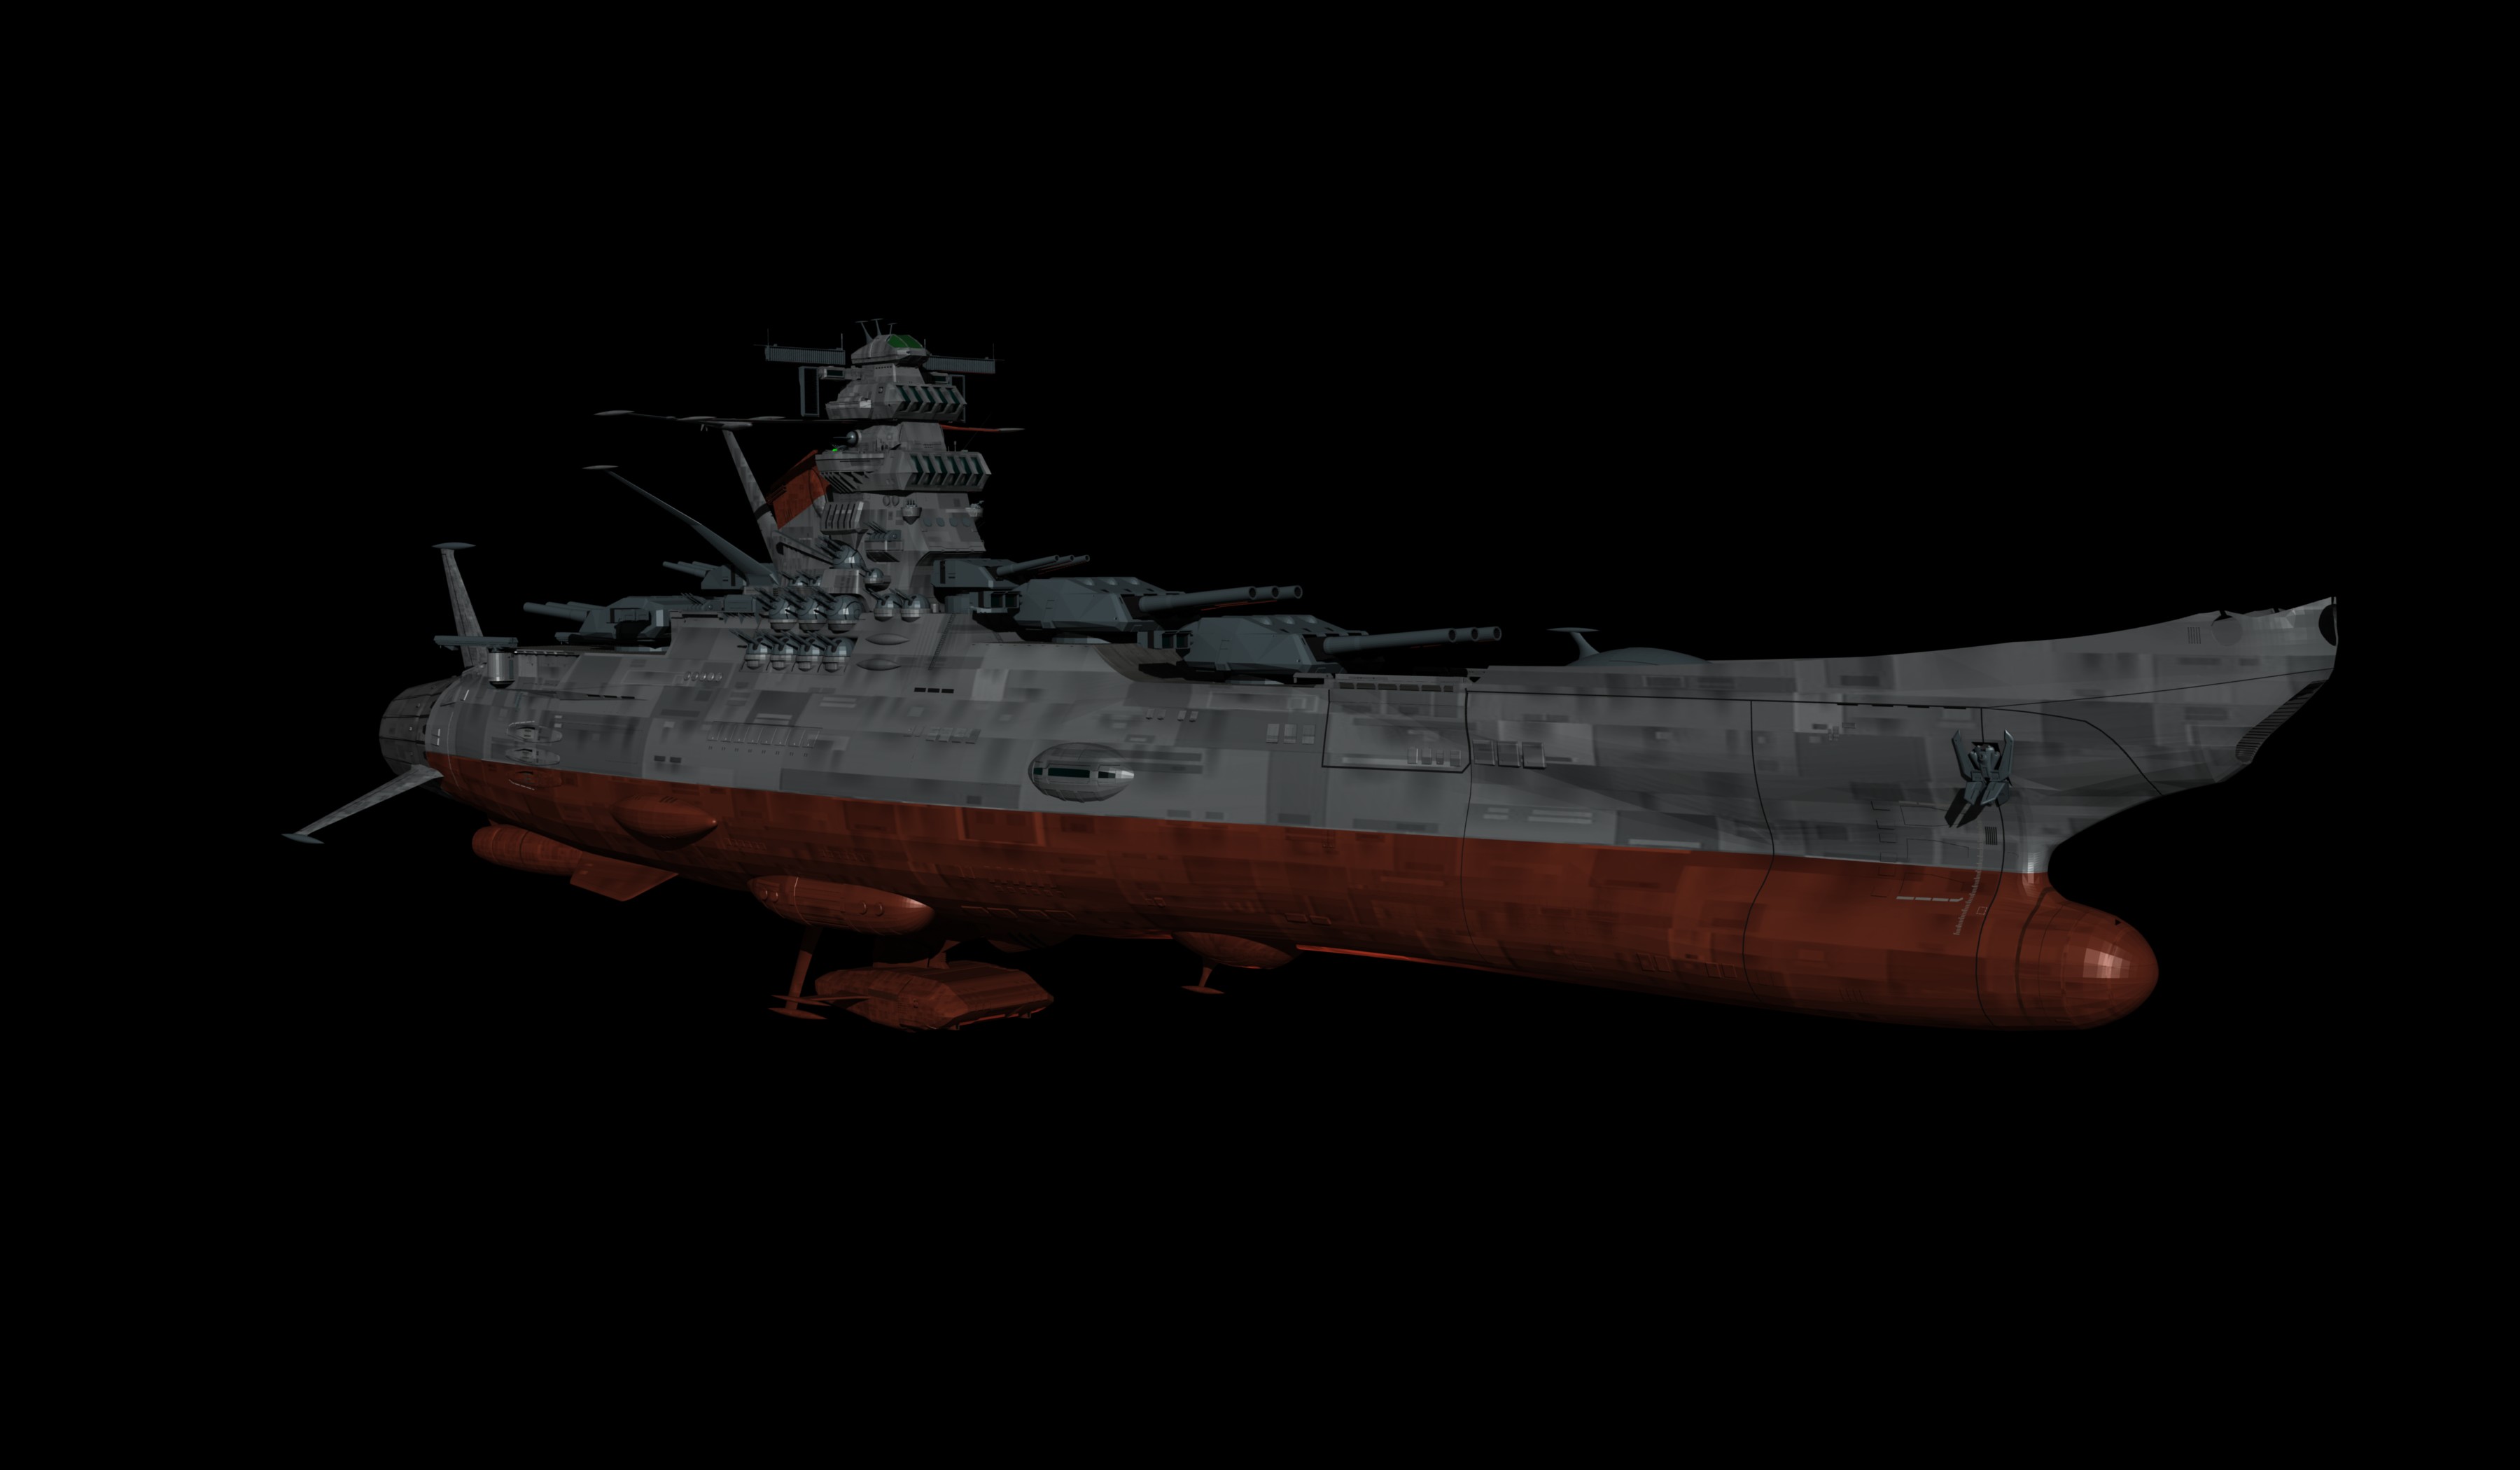 Space Battleship Yamato Backgrounds, Compatible - PC, Mobile, Gadgets| 3600x2100 px